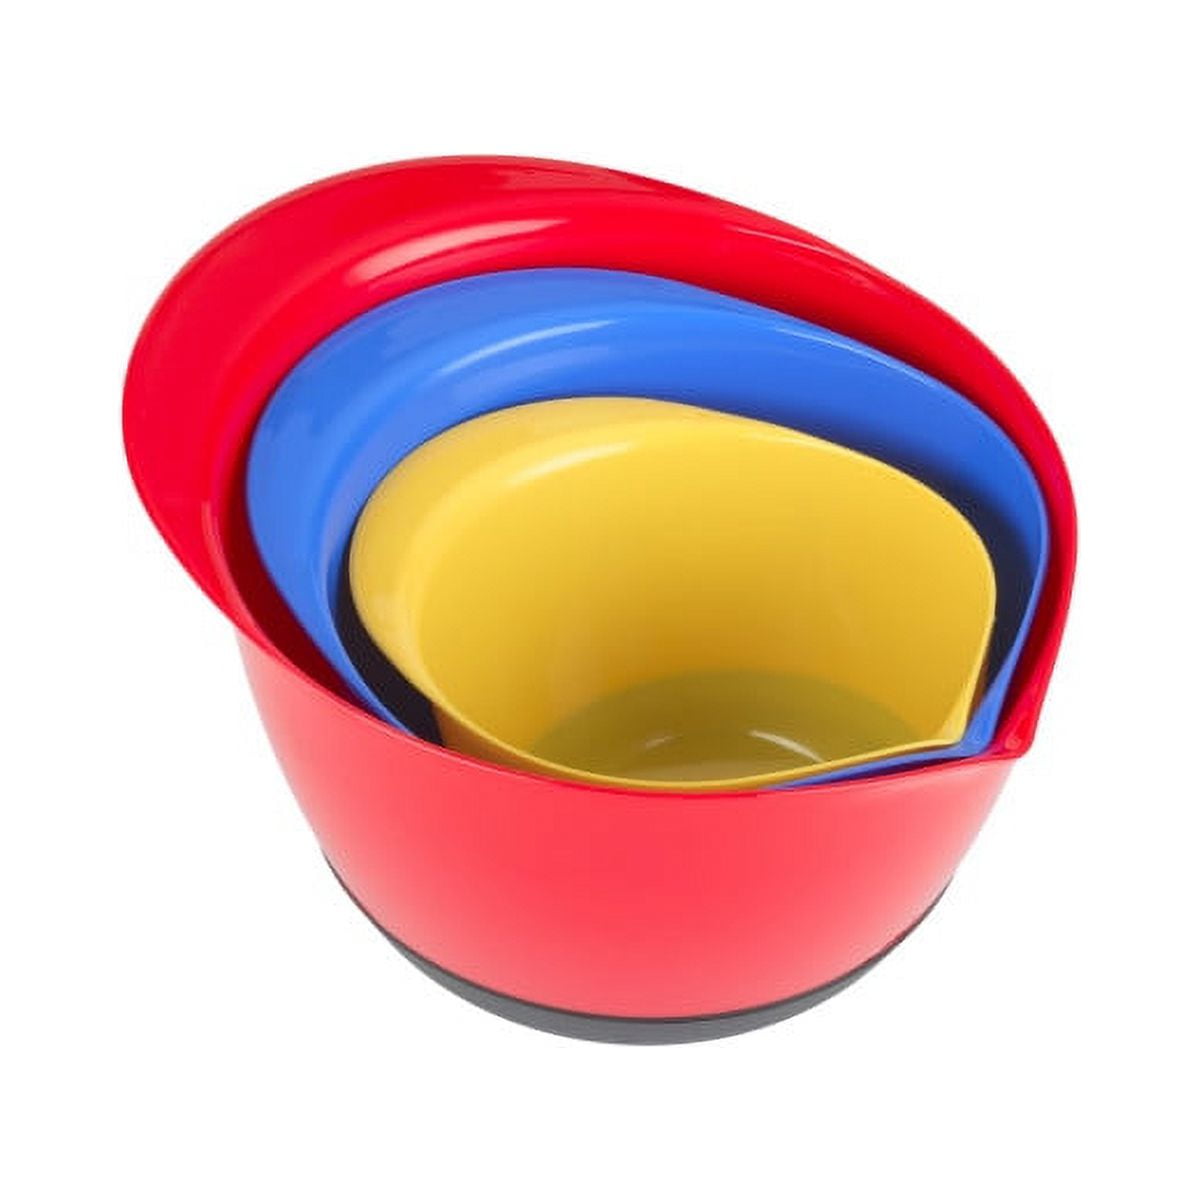 GoodCook EveryWare Holiday Extra Large Bowl - 15.7 Cups in 2023